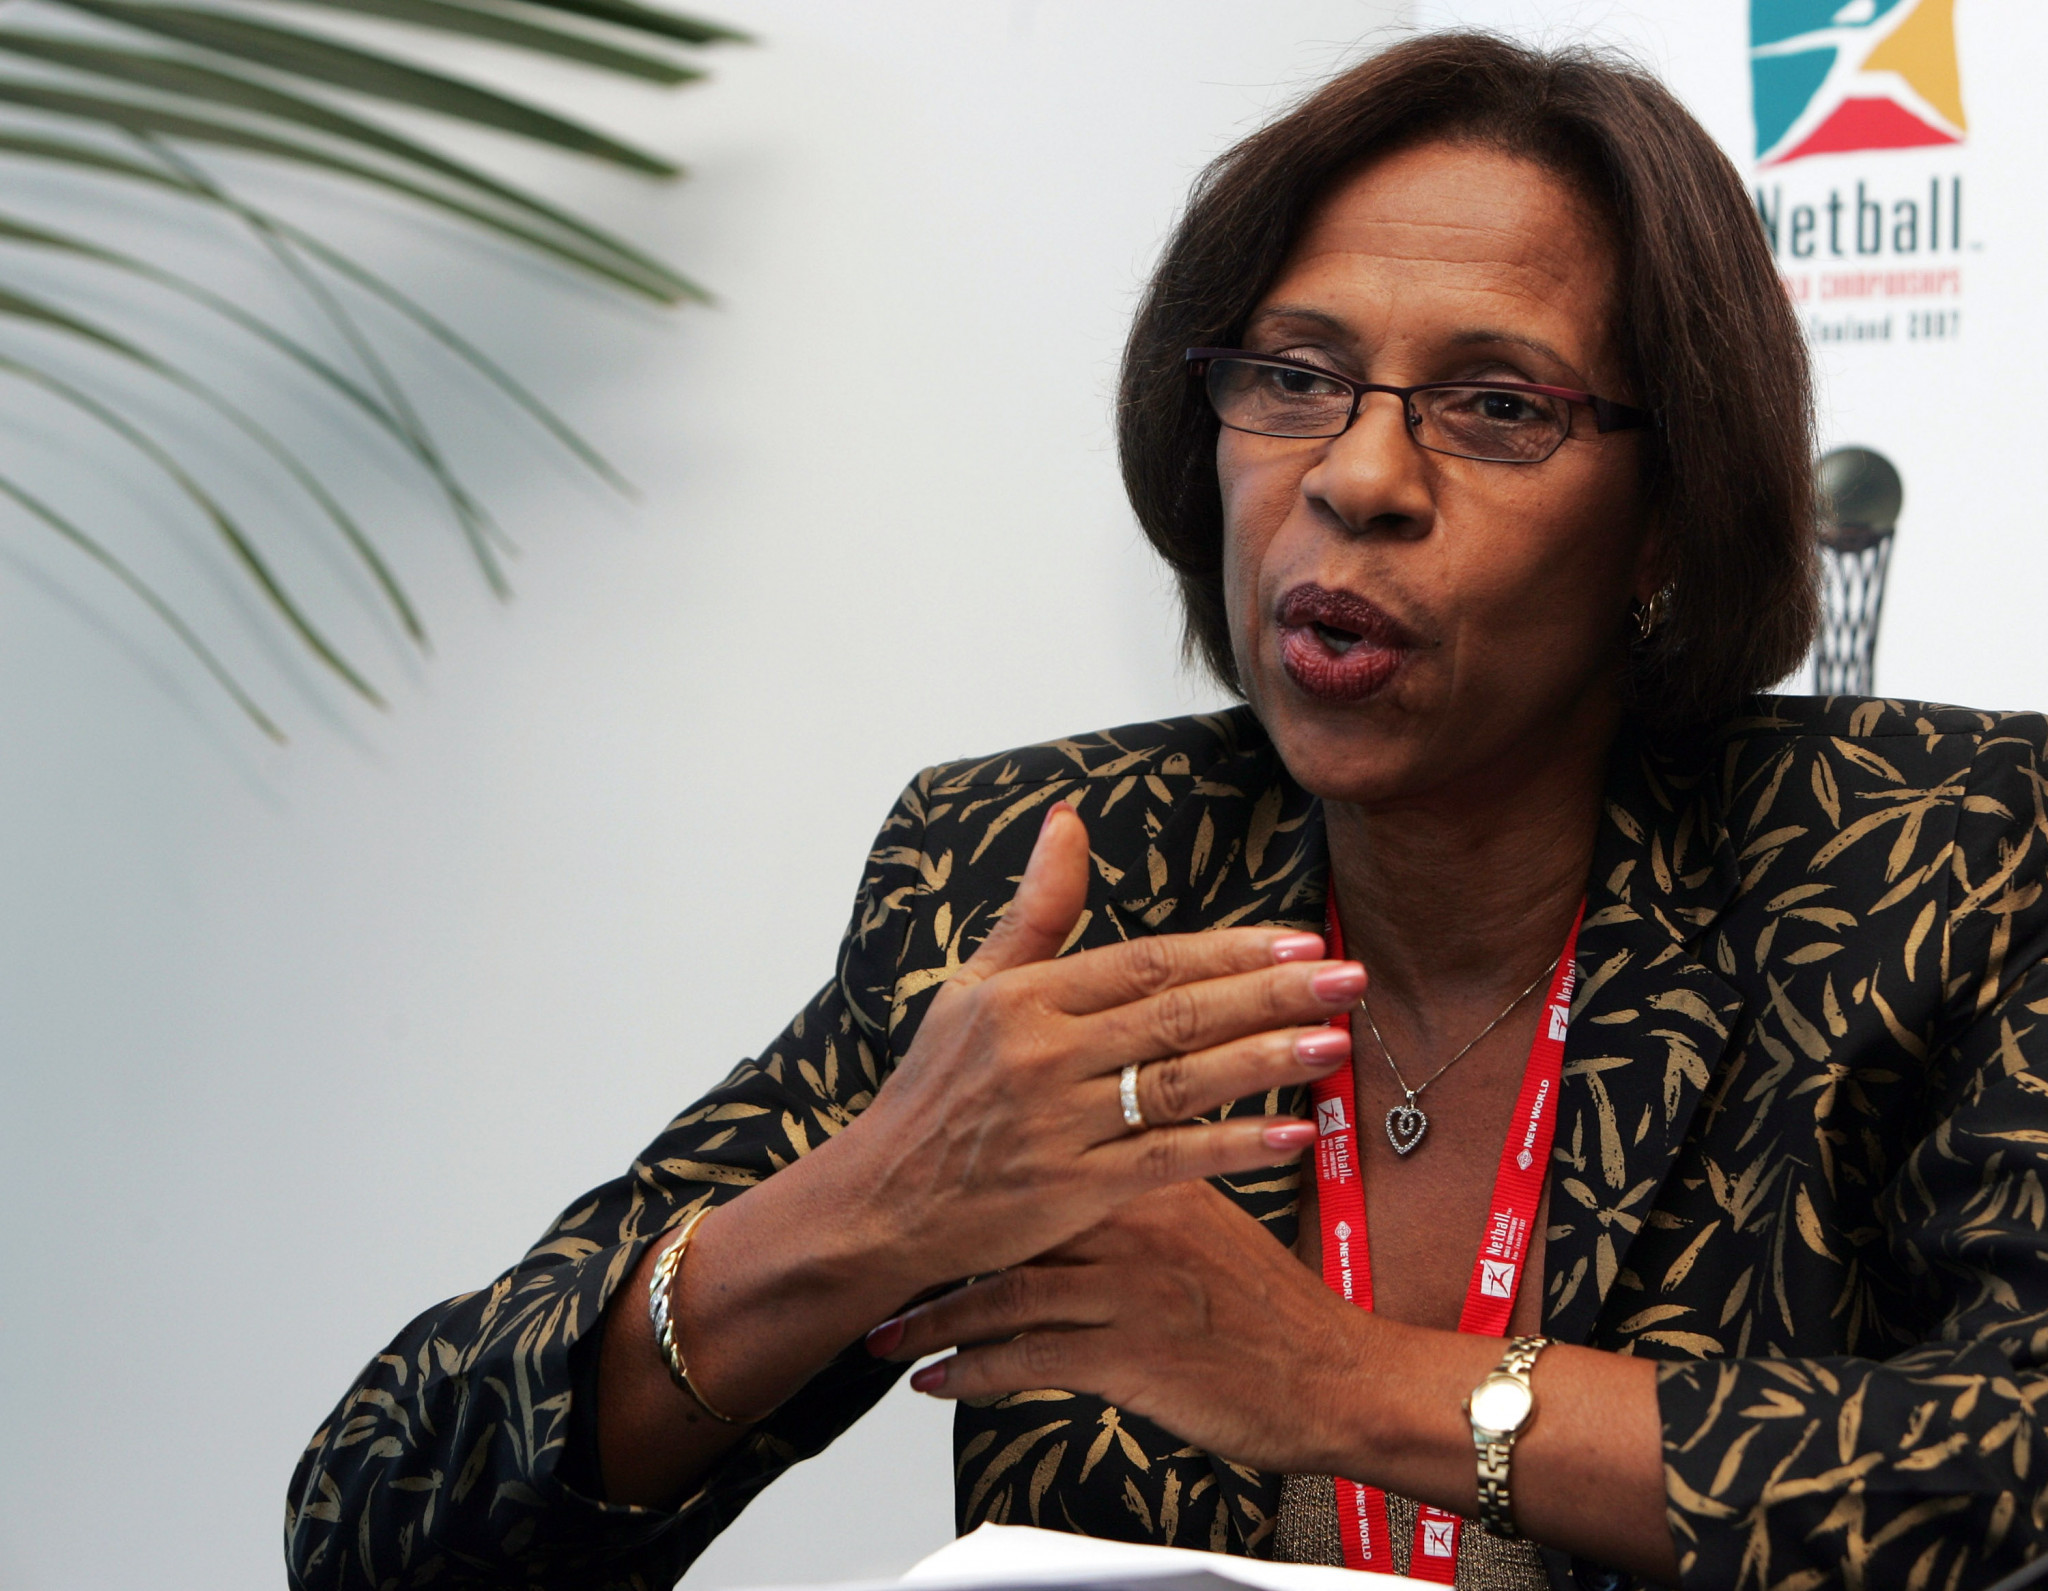 International Netball Federation President Rhone "extremely proud" of 2018 achievements